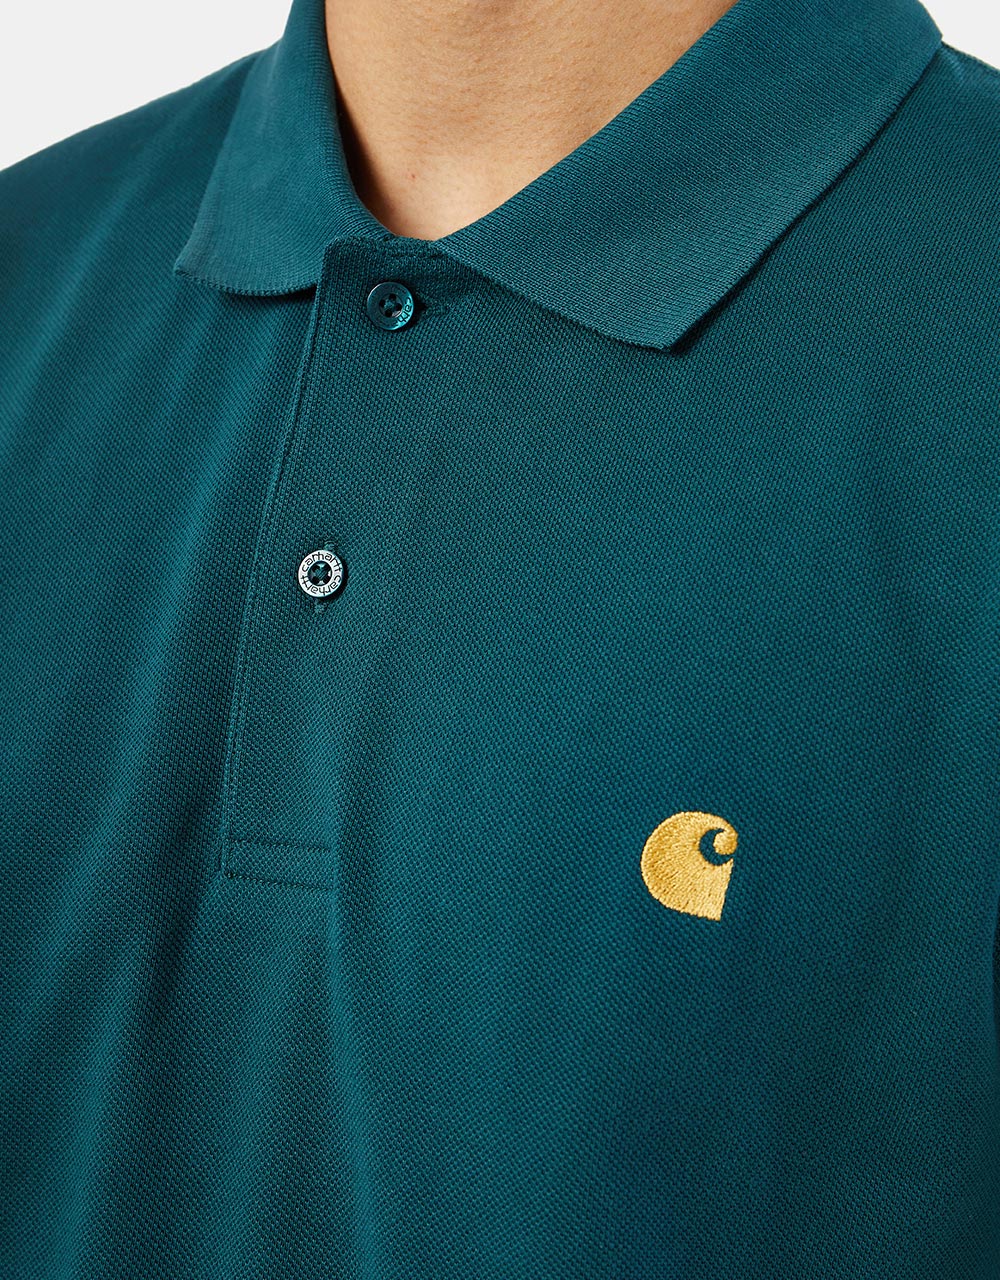 Carhartt WIP S/S Chase Pique Polo - Botanic/Gold – Route One